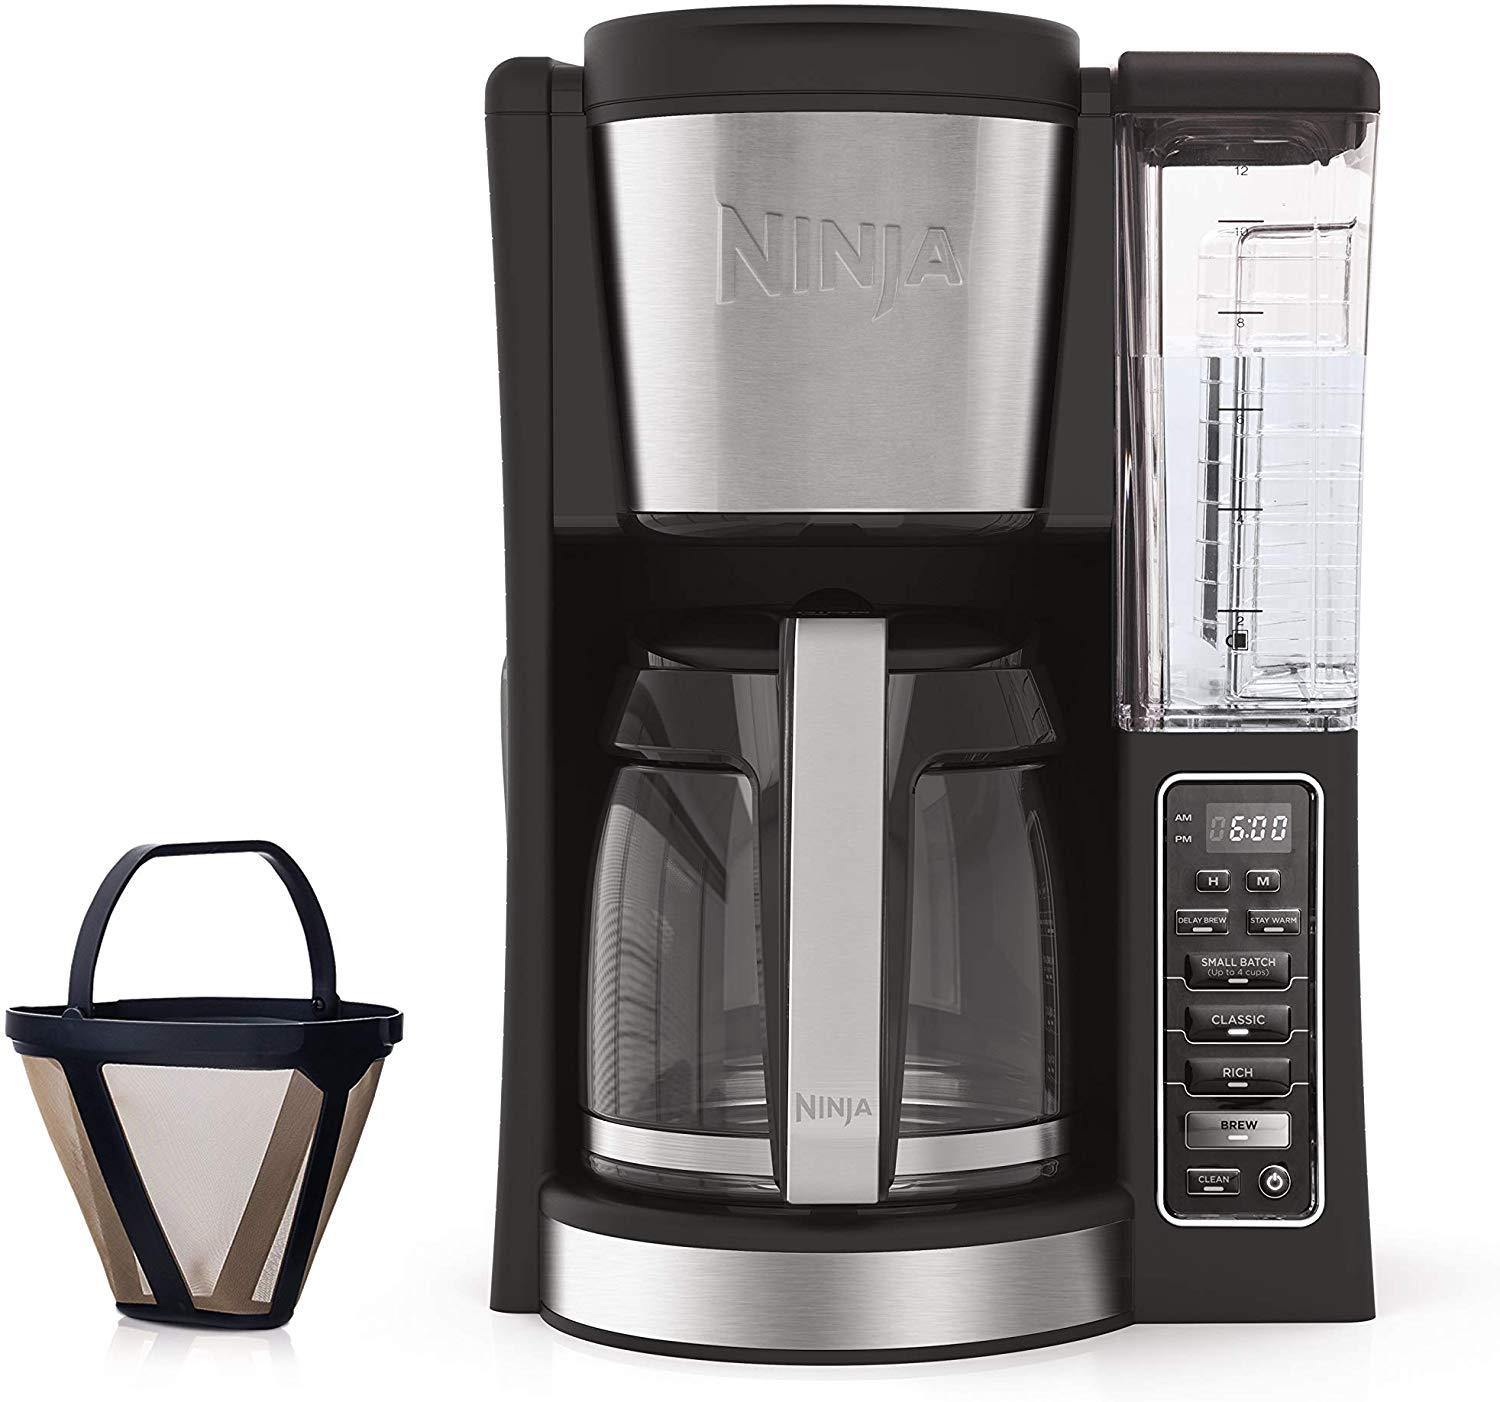 Ninja DualBrew Pro Specialty Coffee Maker Review: almost all-in